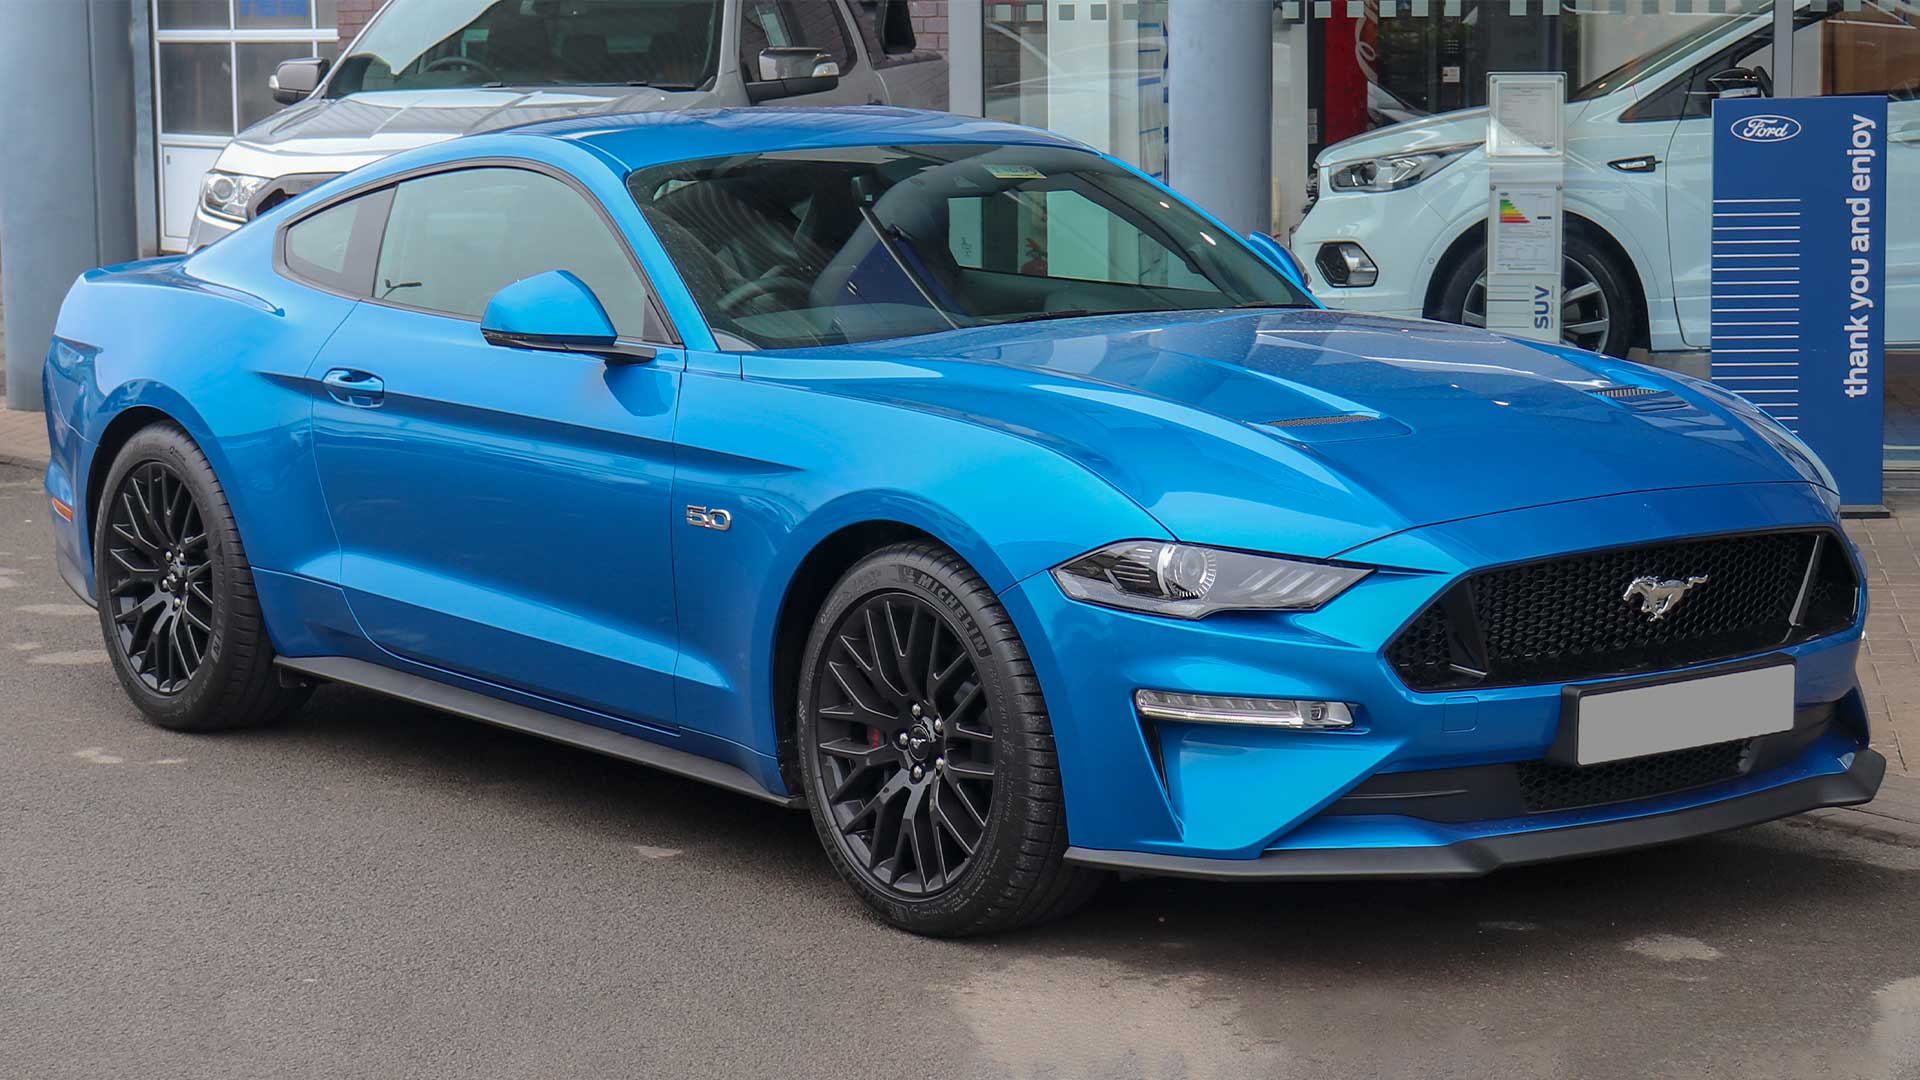 A 2015-2017 Model Year Ford Mustang